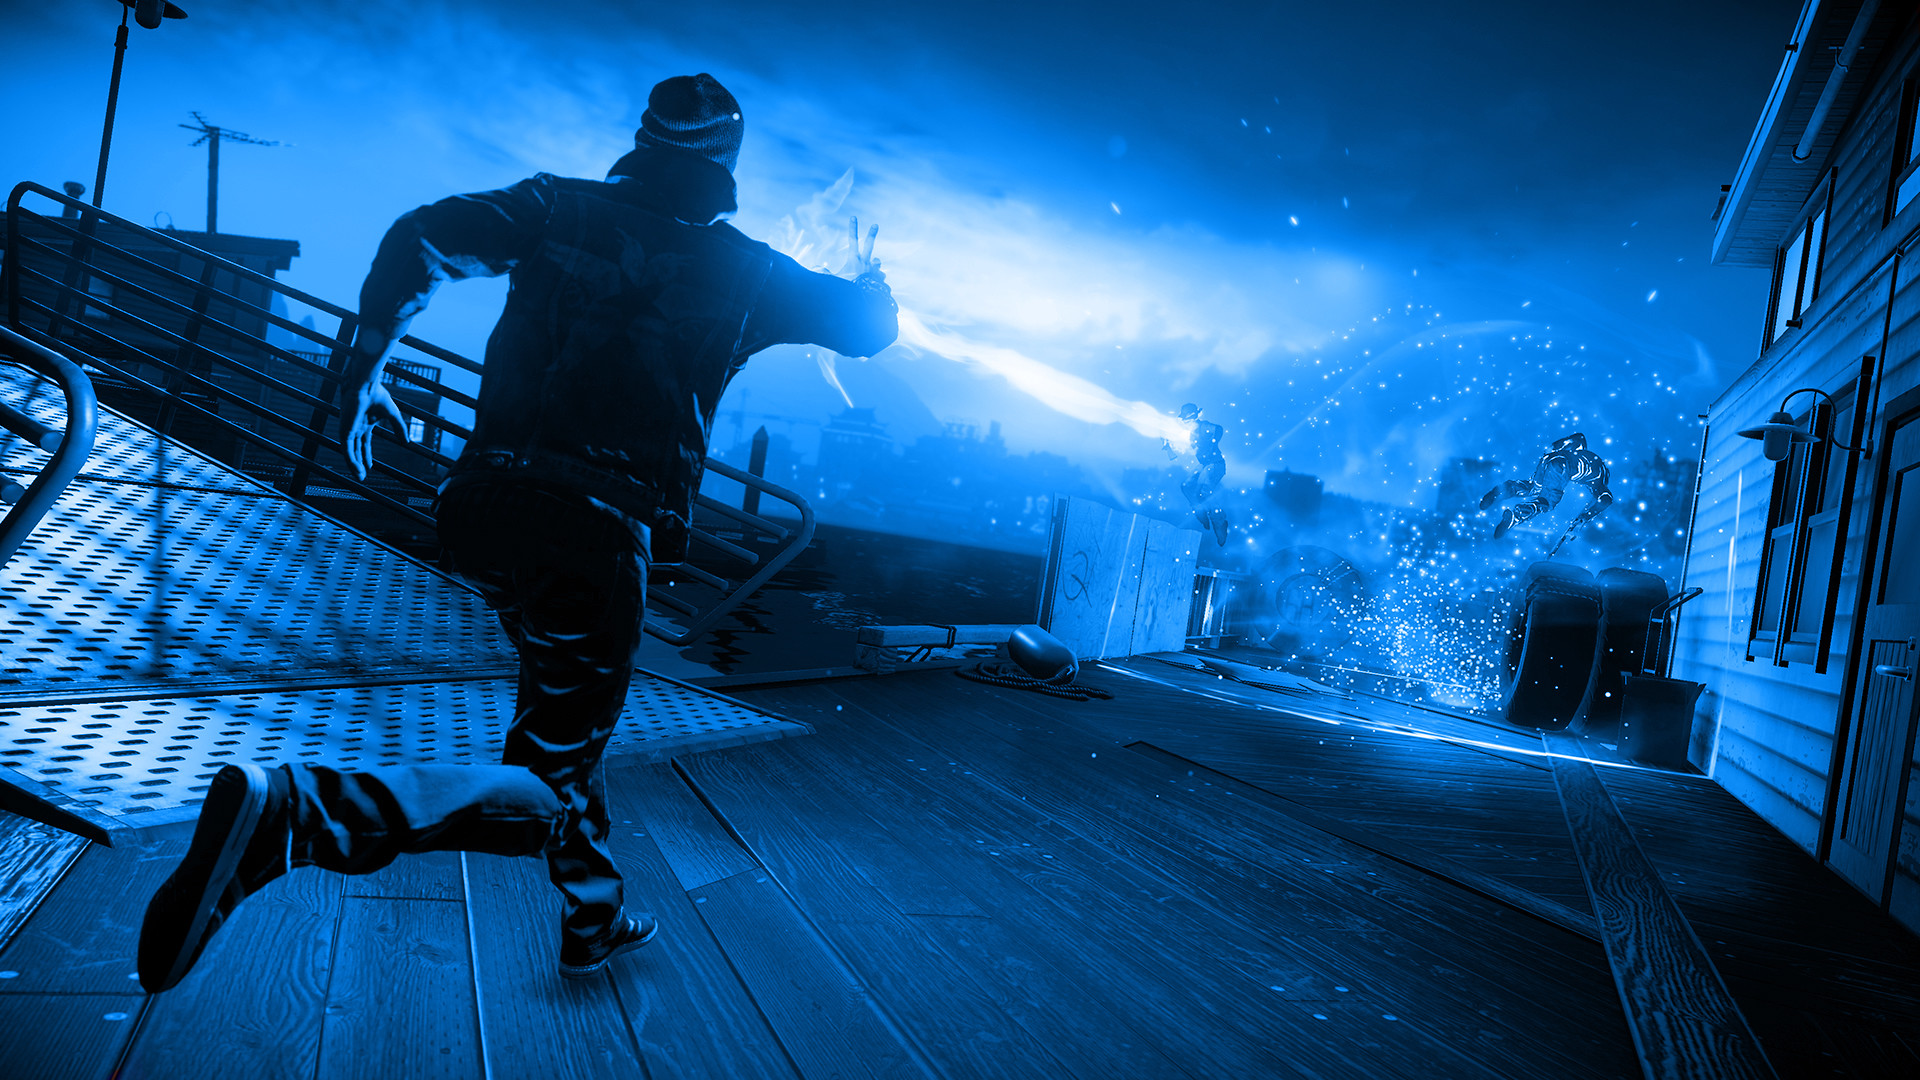 1920x1080 ... Infamous Second Son Blue Neon Wallpaper 6 by XtremisMaster